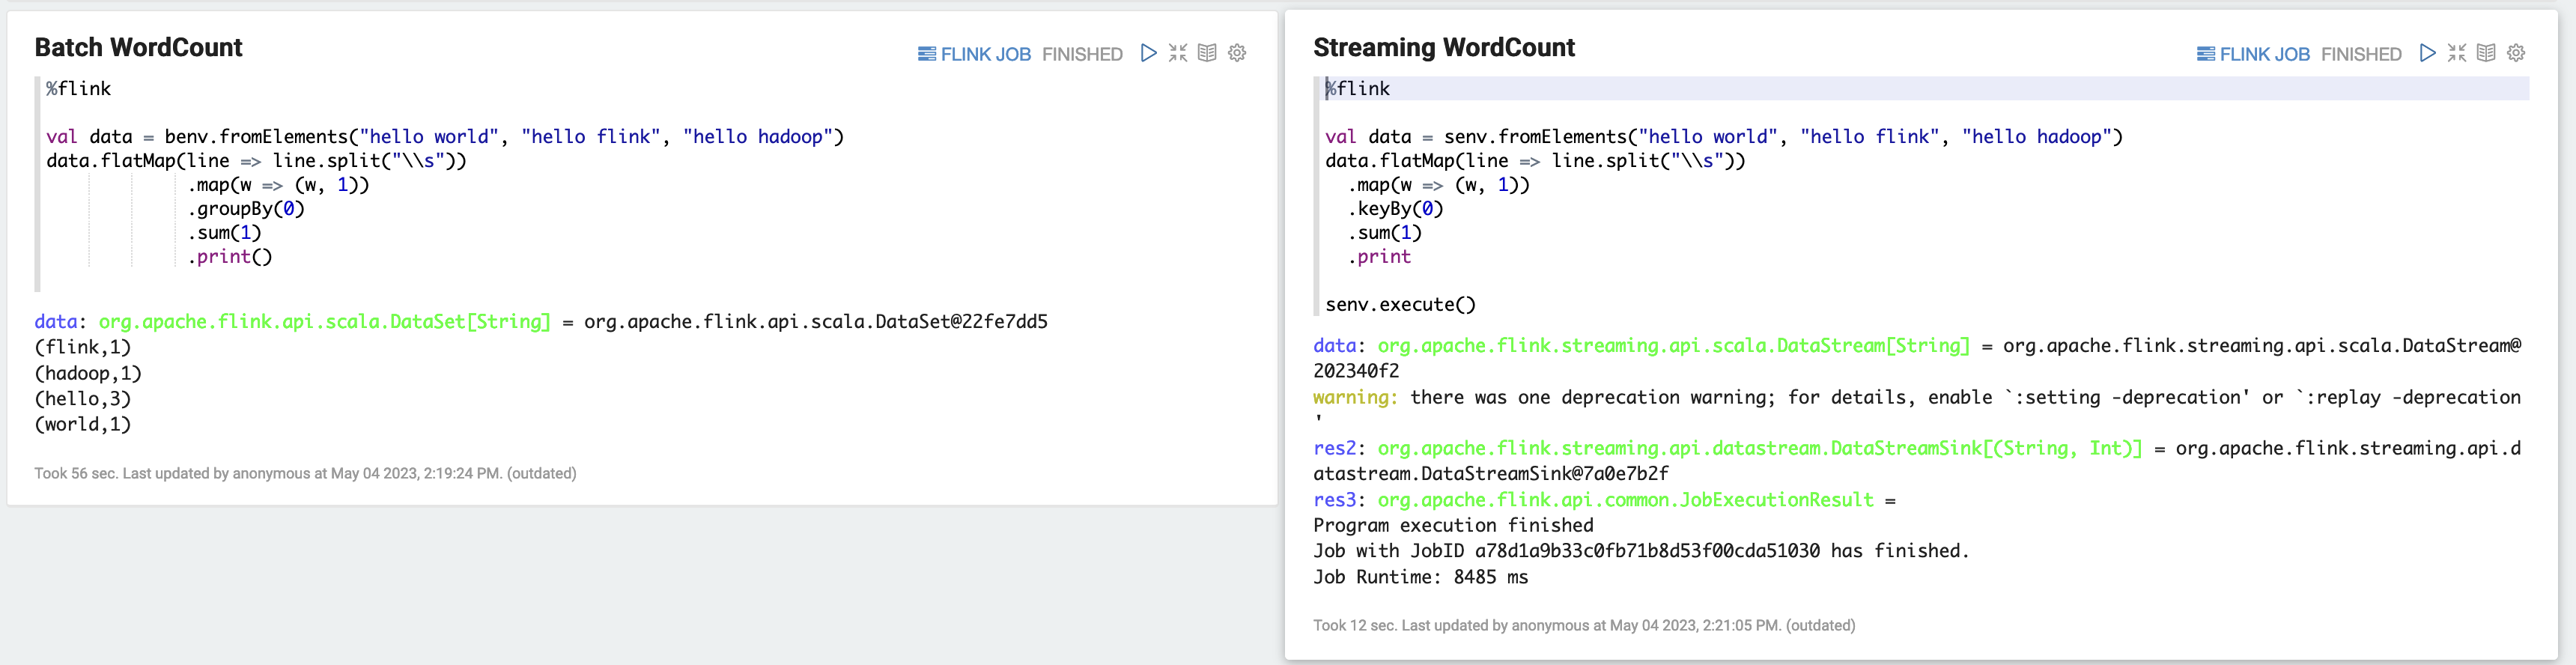 For example, you can run batch WordCount and streaming WordCount jobs from a Zeppelin notebook.